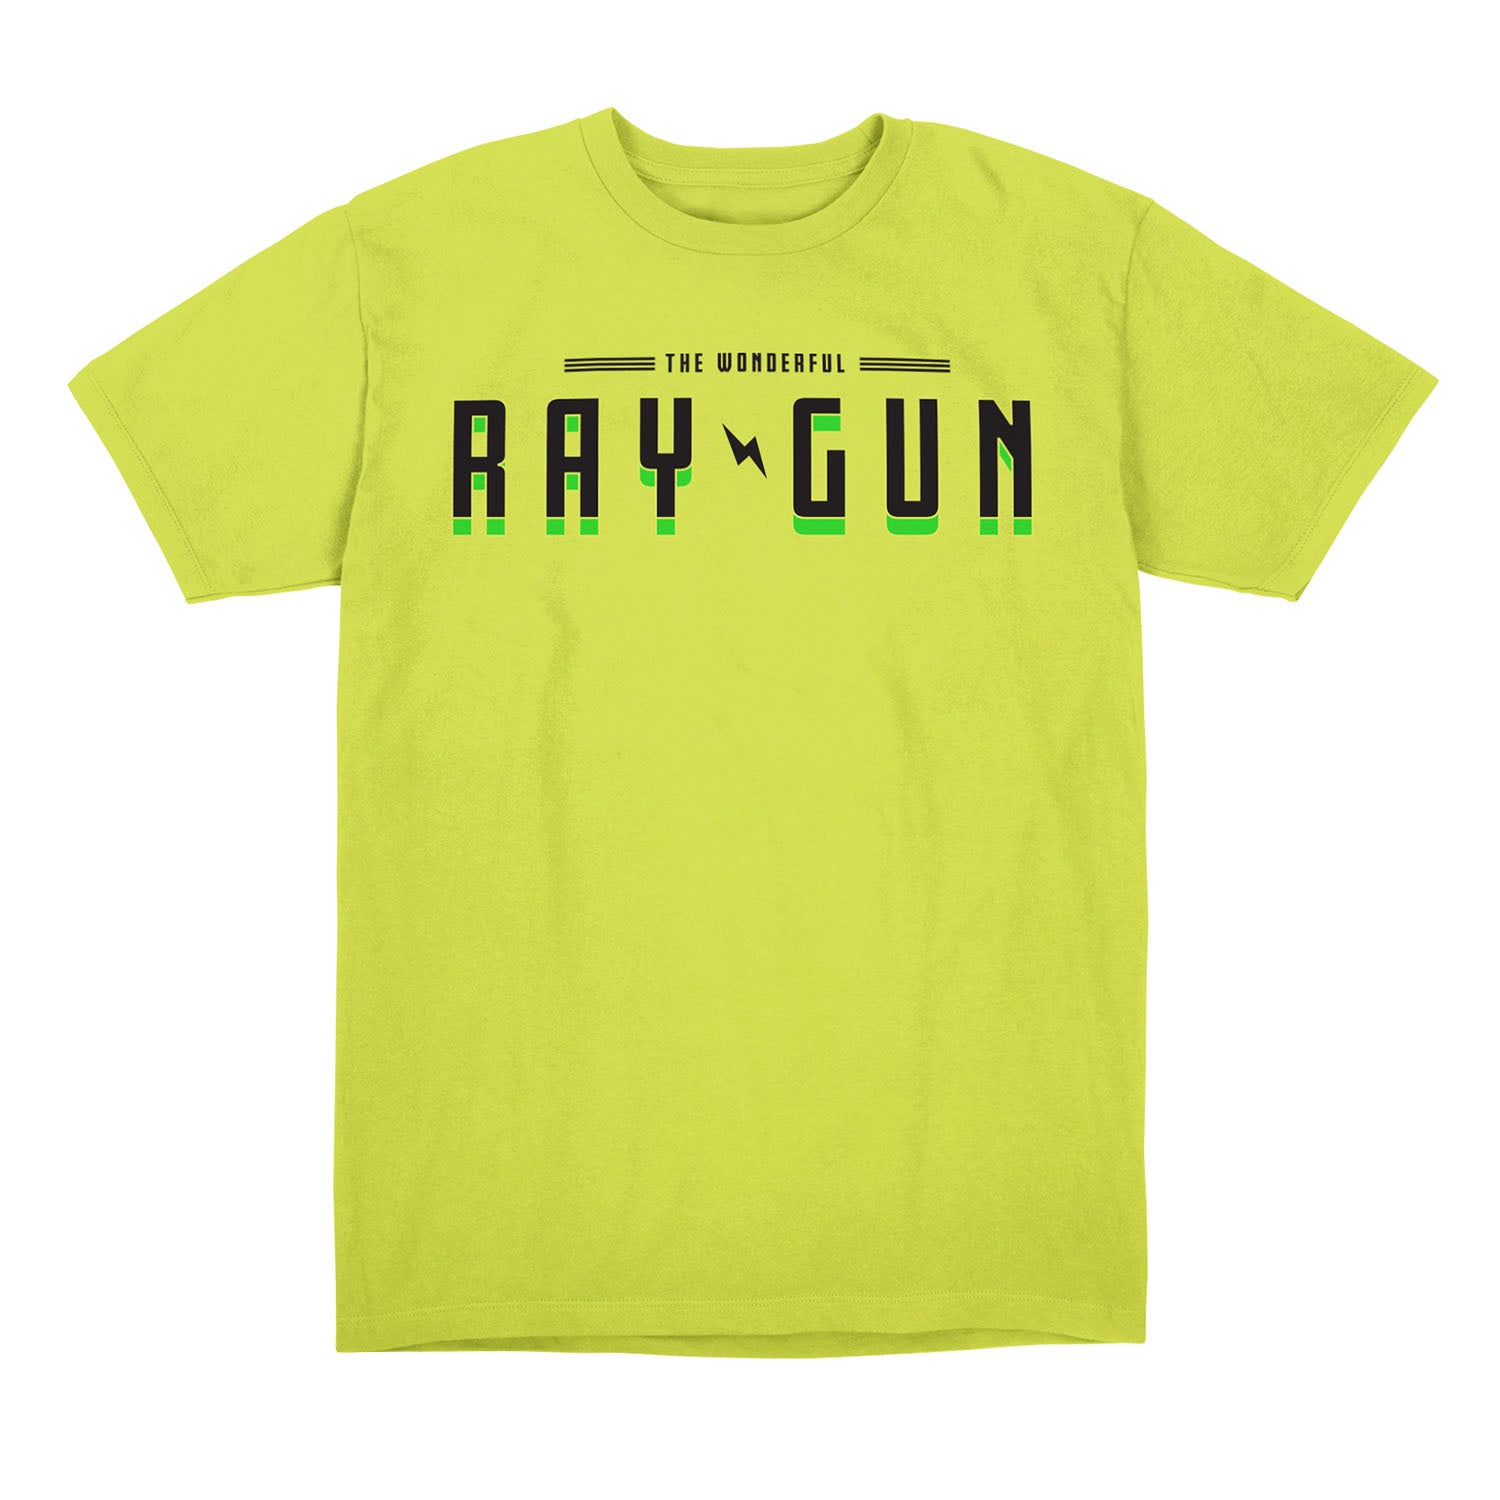 Call of Duty Yellow Raygun T-Shirt - Front View